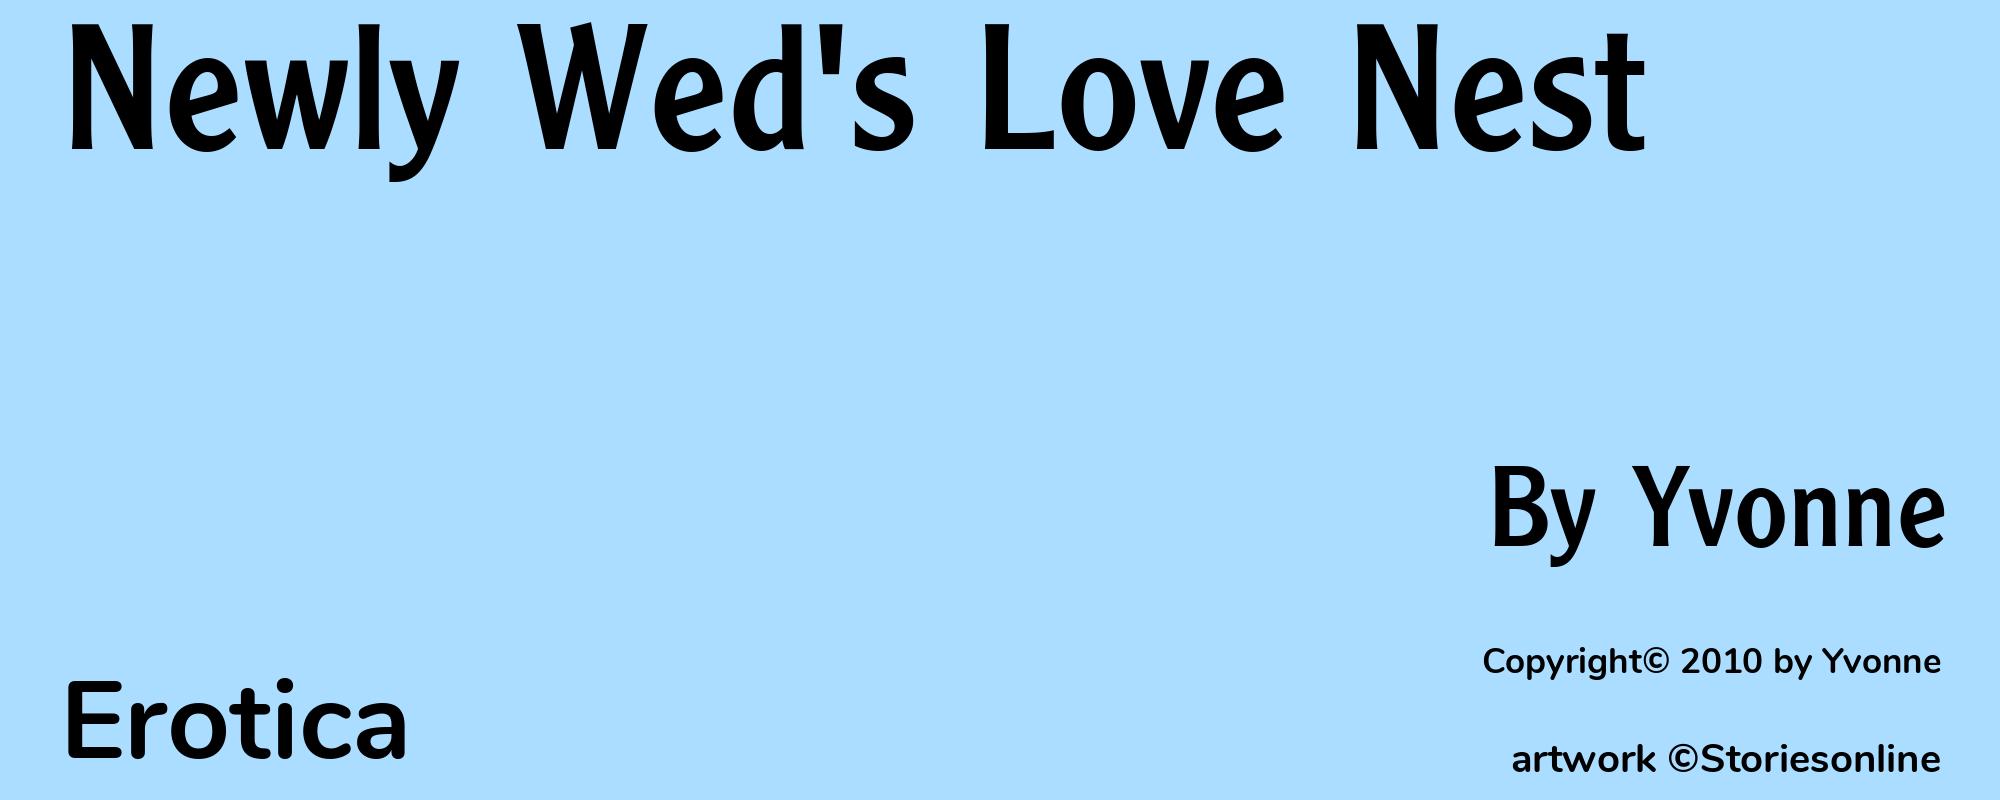 Newly Wed's Love Nest - Cover